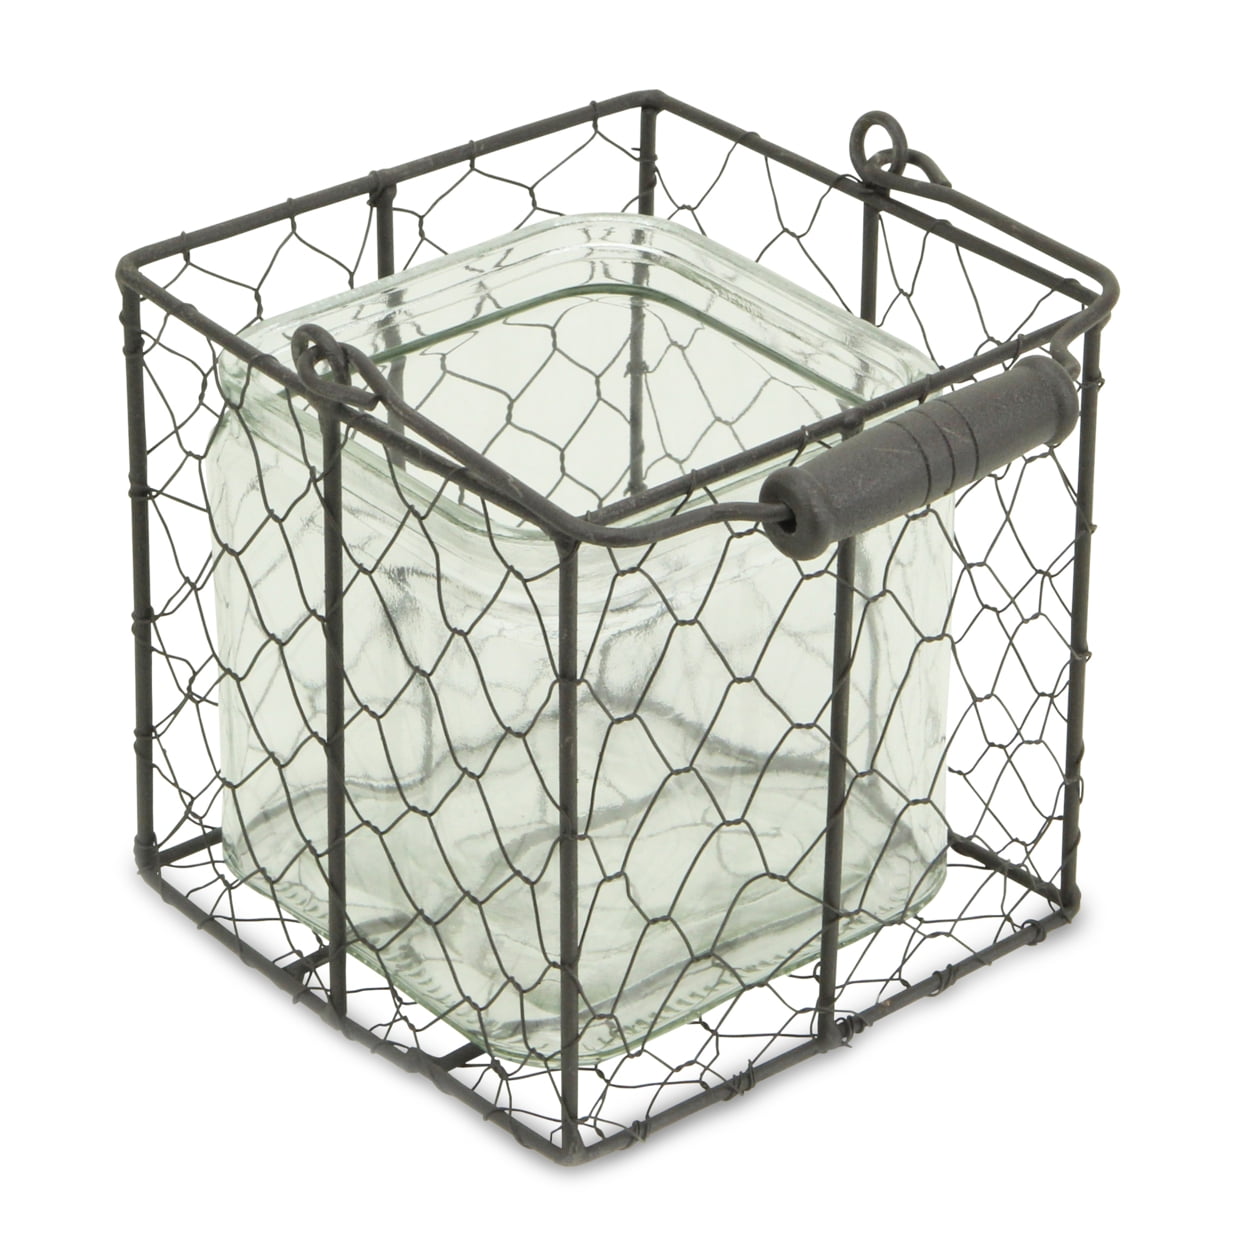 15s002brl Square Glass Jar In Wire Basket, Brown - Large